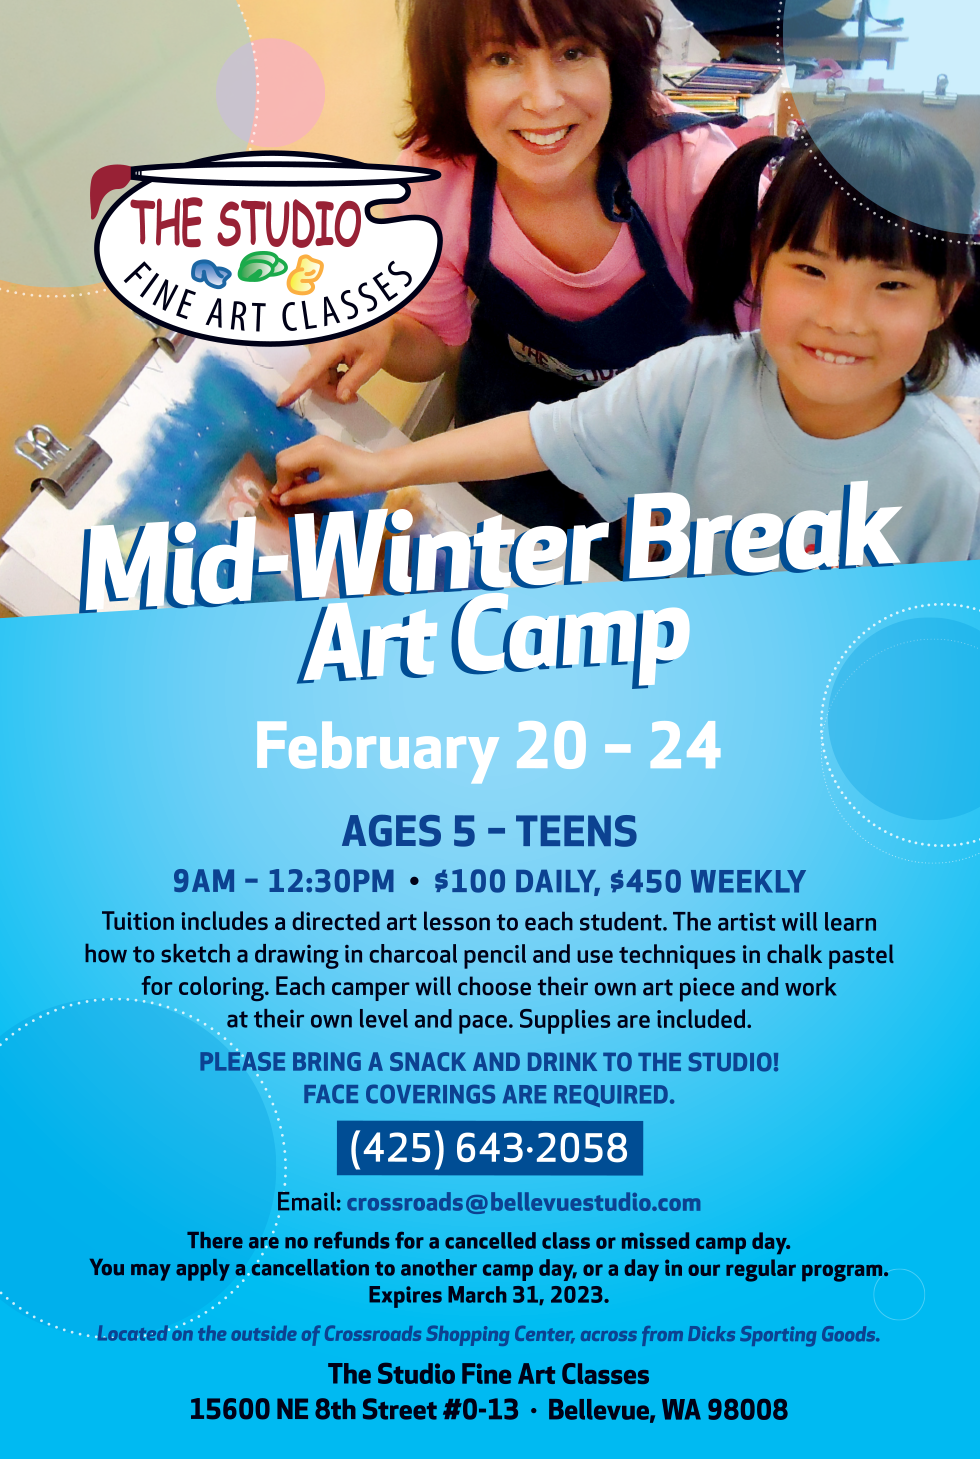 230113-The-Studio-MId-Winter-Art-Camp-980px.png